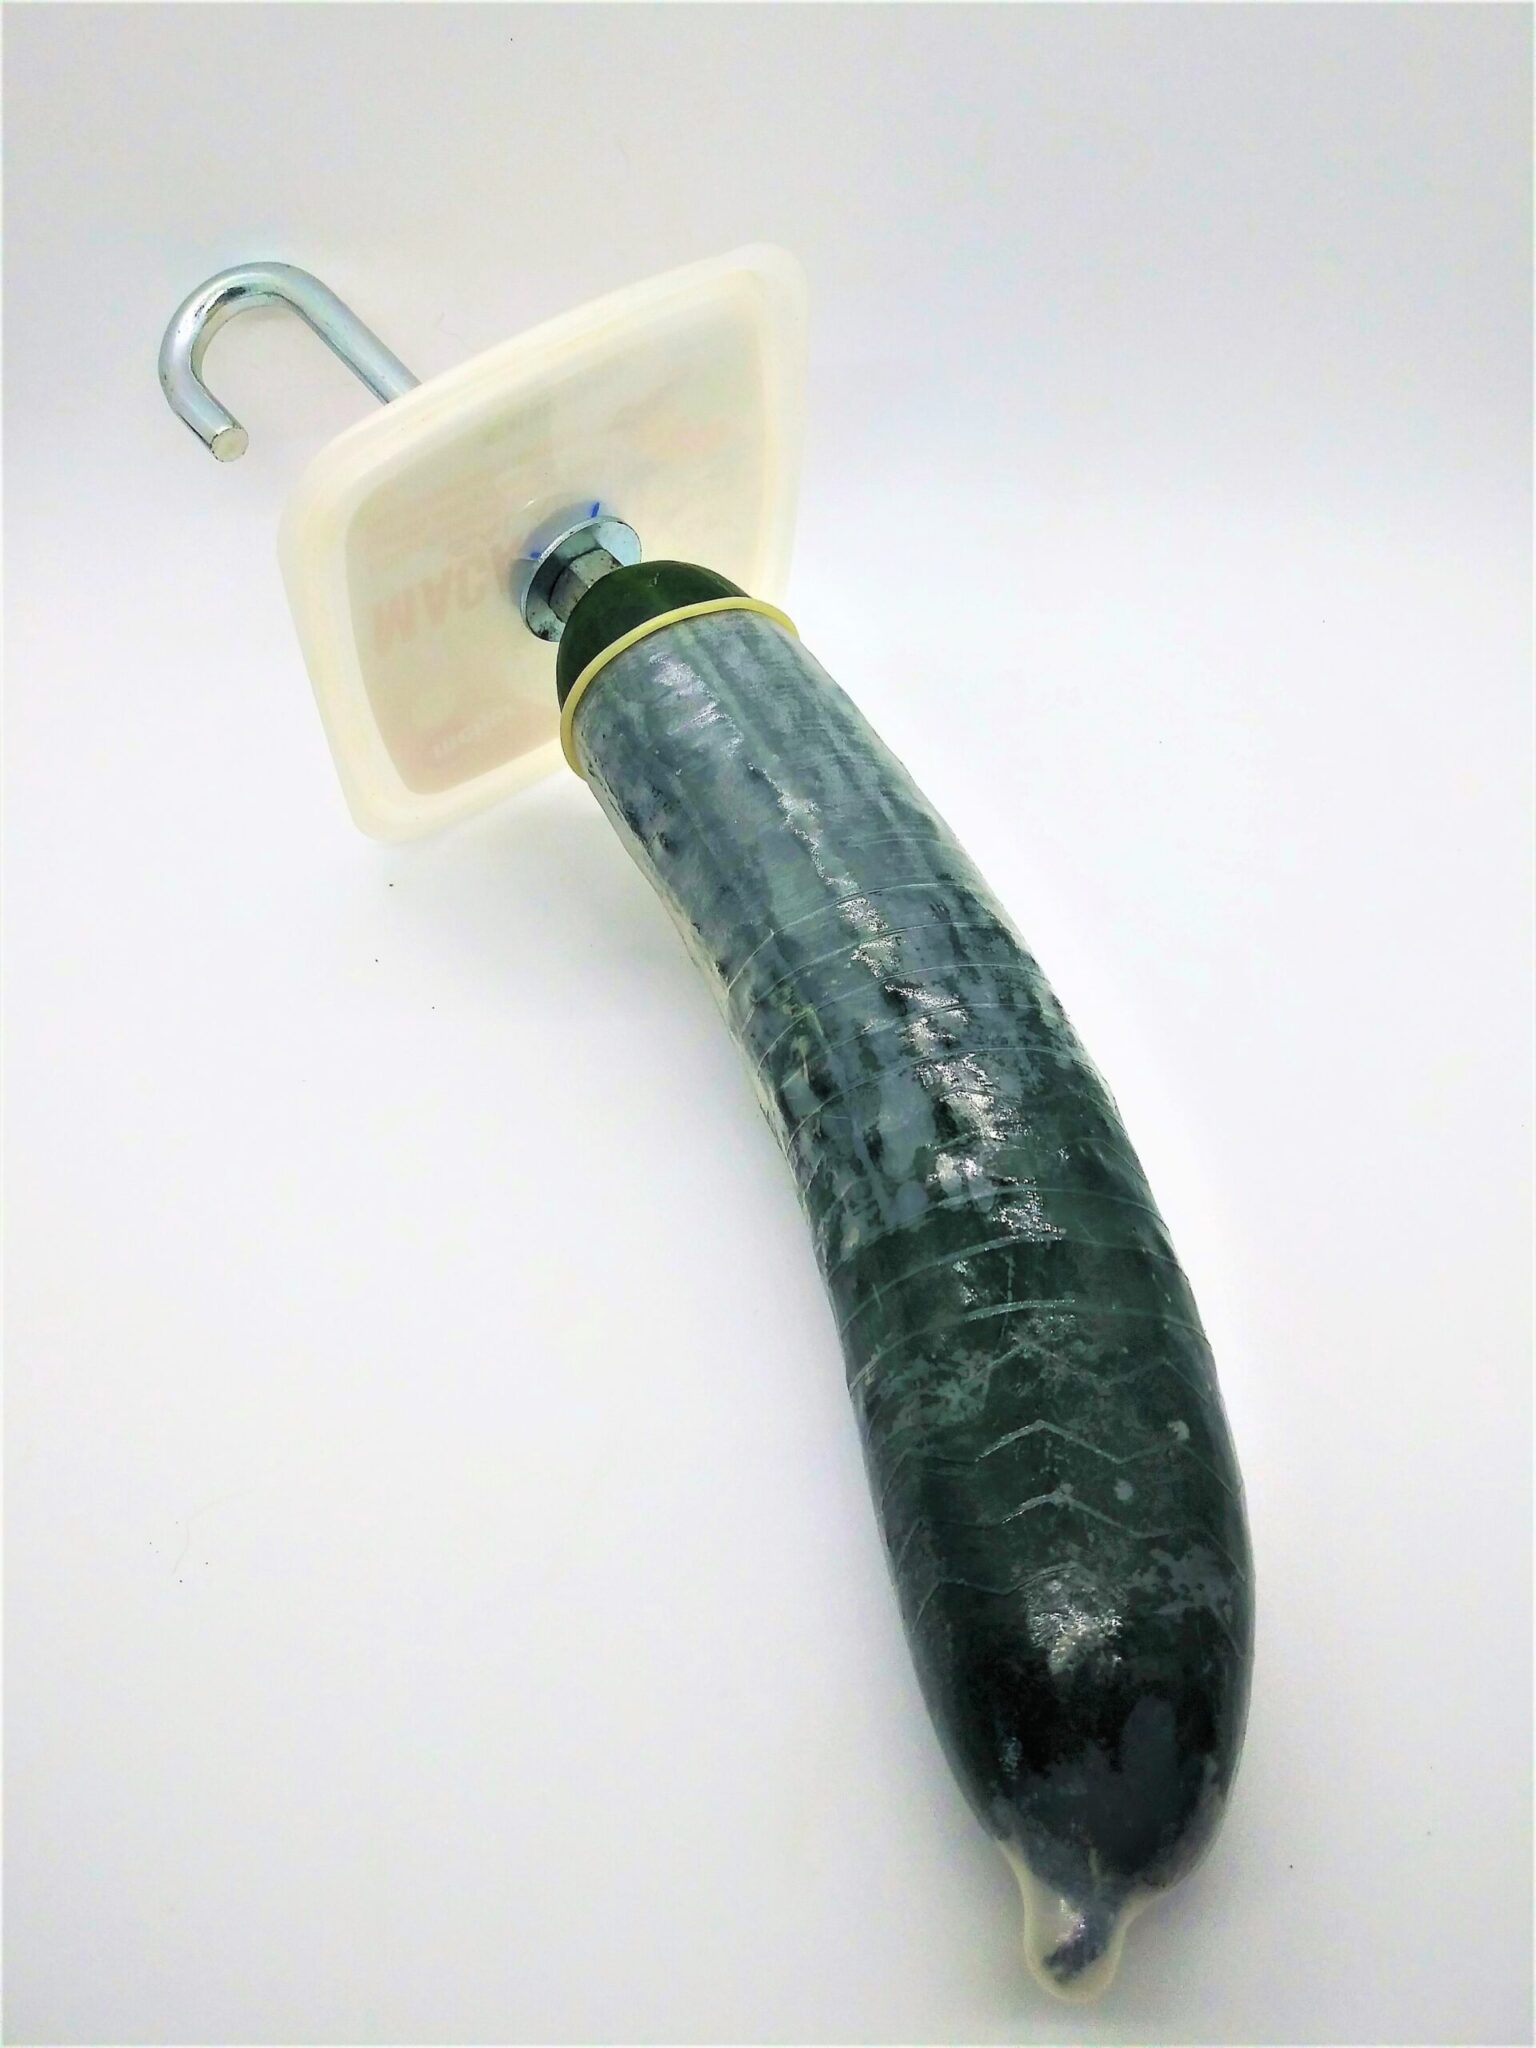 DIY anal sex toys using vegetables. Photo of a large cucumber on a DIY anal sex toy safety base.